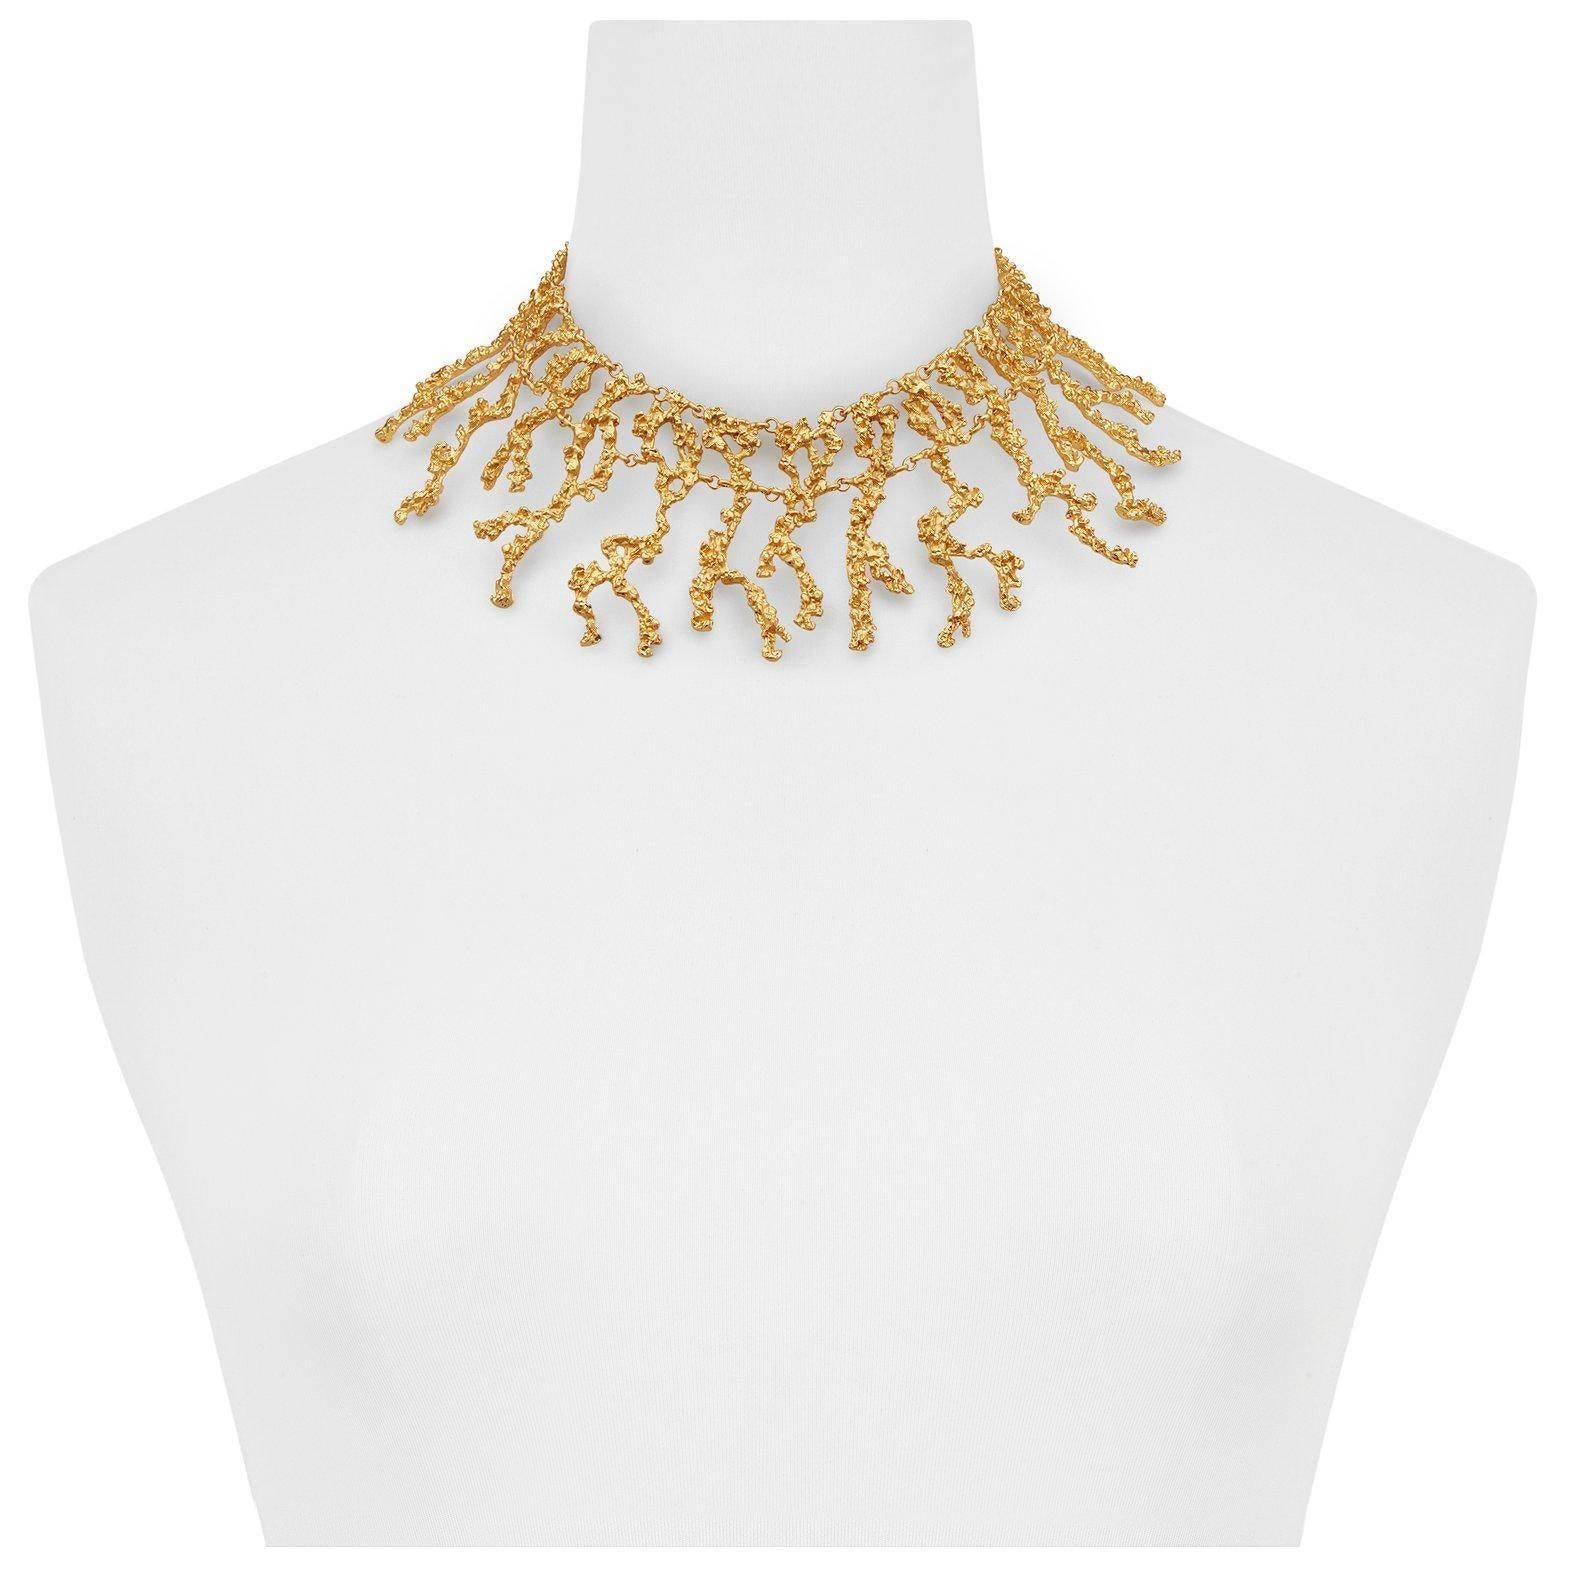 Giuseppe Zanotti NEW Textured Gold Pendant Evening Charm Choker Necklace in Box

Metal
Gold tone
Lobster claw closure
Made In Italy
Total length 15